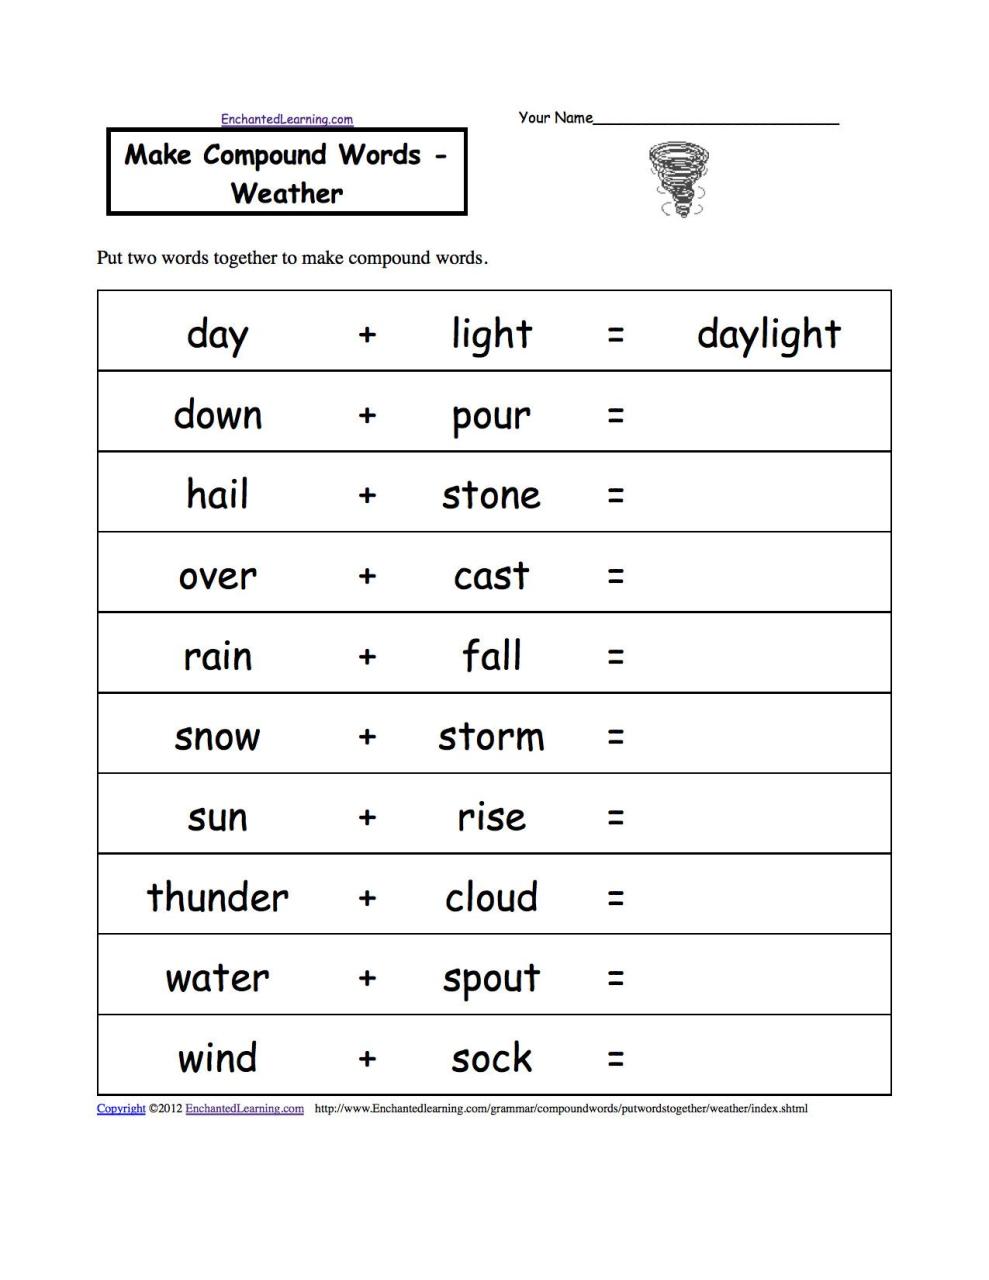 Science Worksheet For Class 3 Pdf